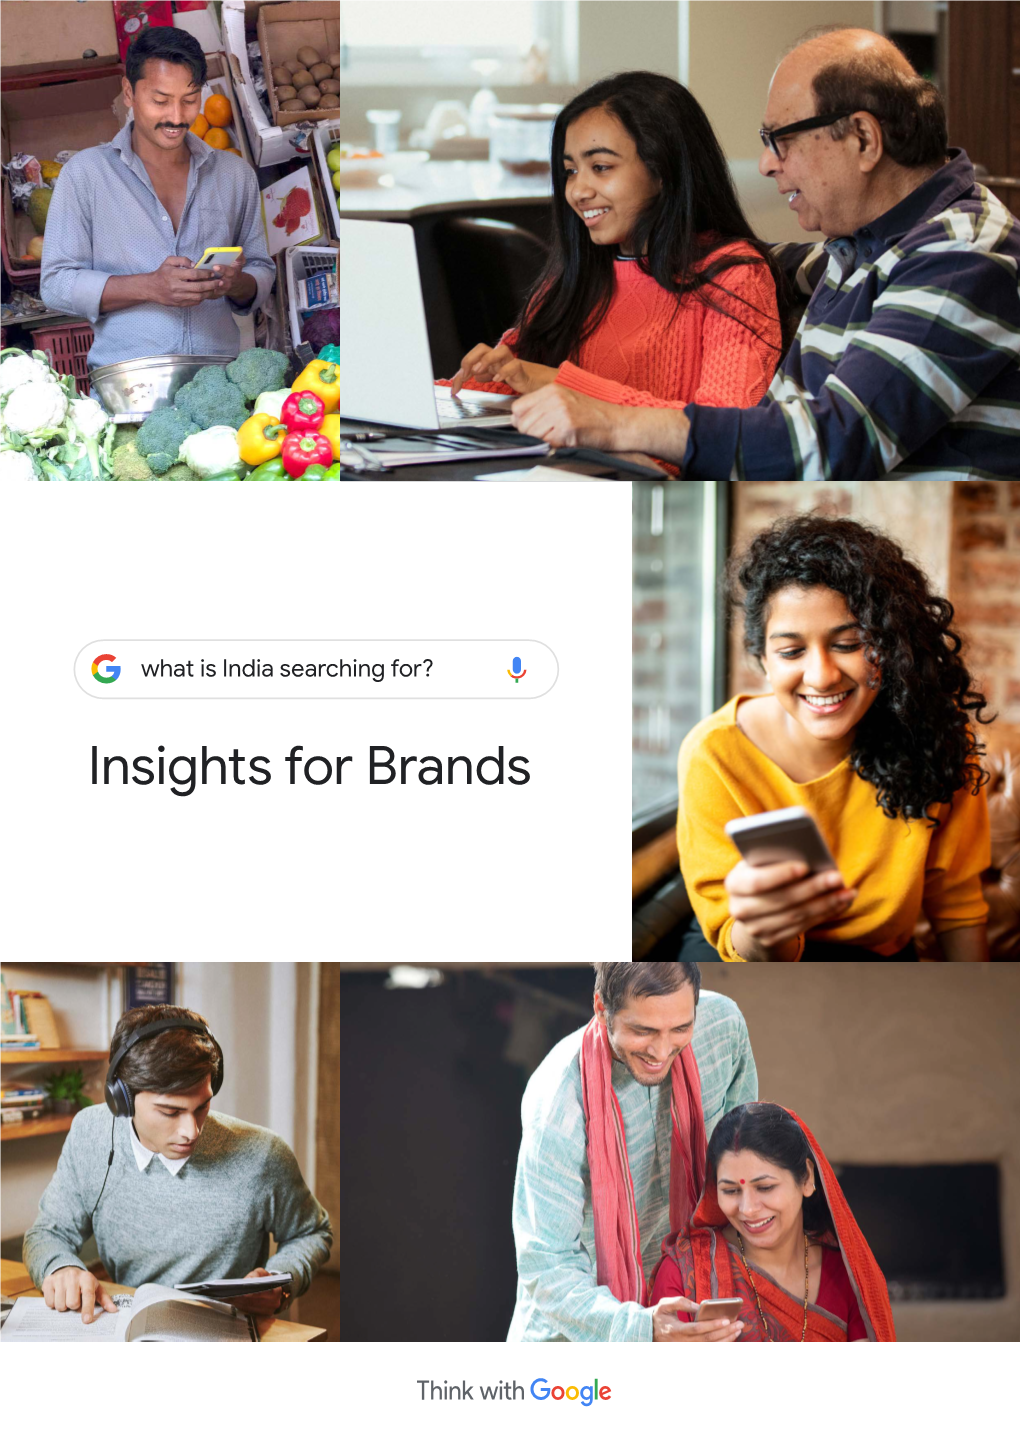 What Is India Searching For? Insights for Brands